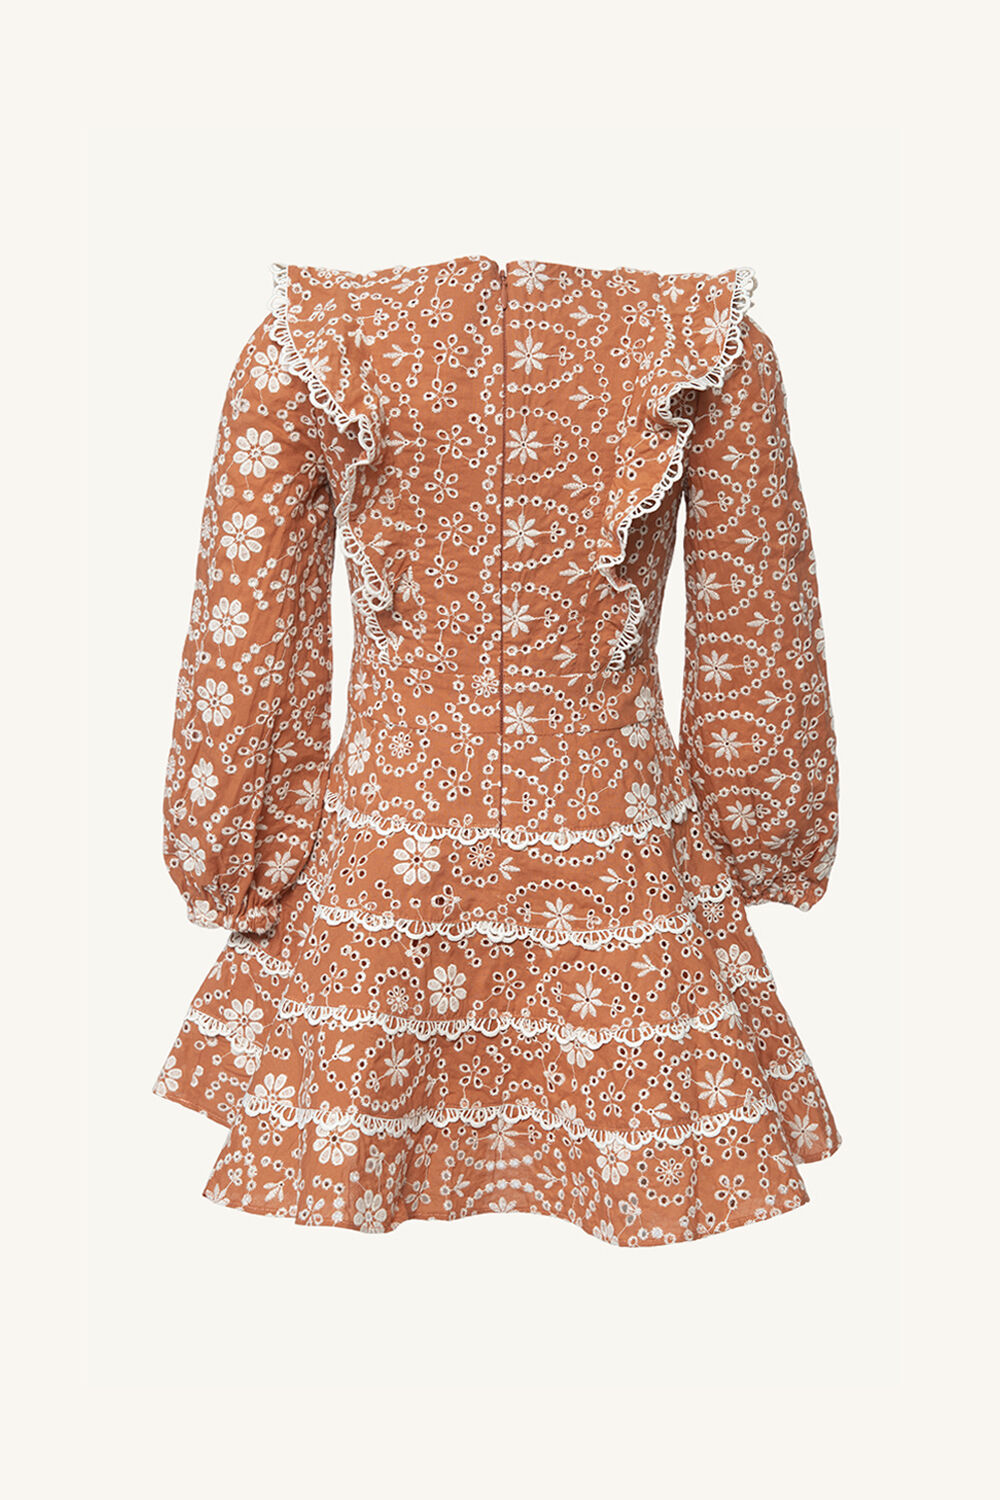 Girls SADIE BRODERIE DRESS in colour GINGER SPICE